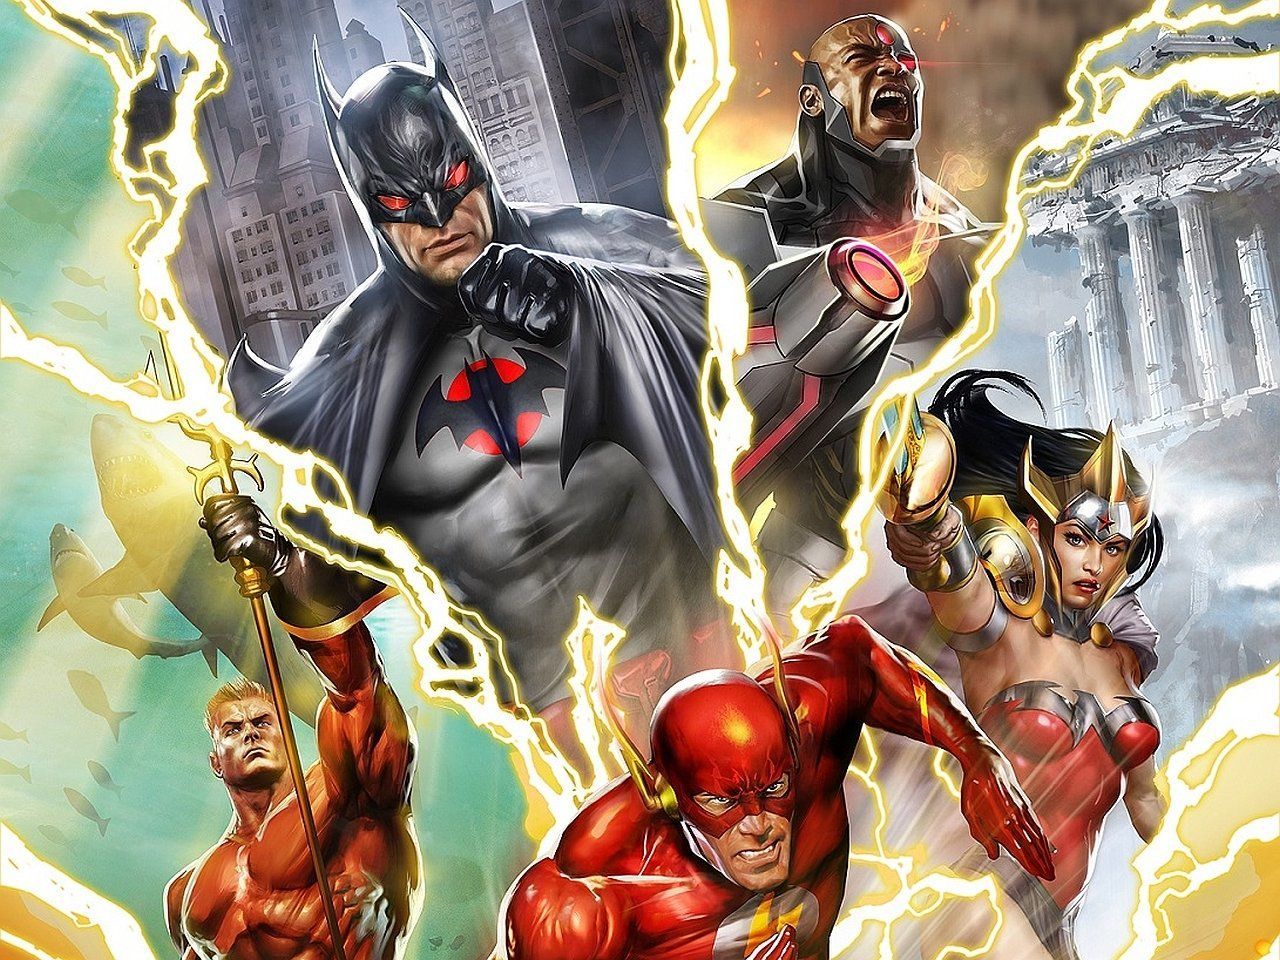 Justice League: The Flashpoint Paradox Wallpaper Free Justice League: The Flashpoint Paradox Background